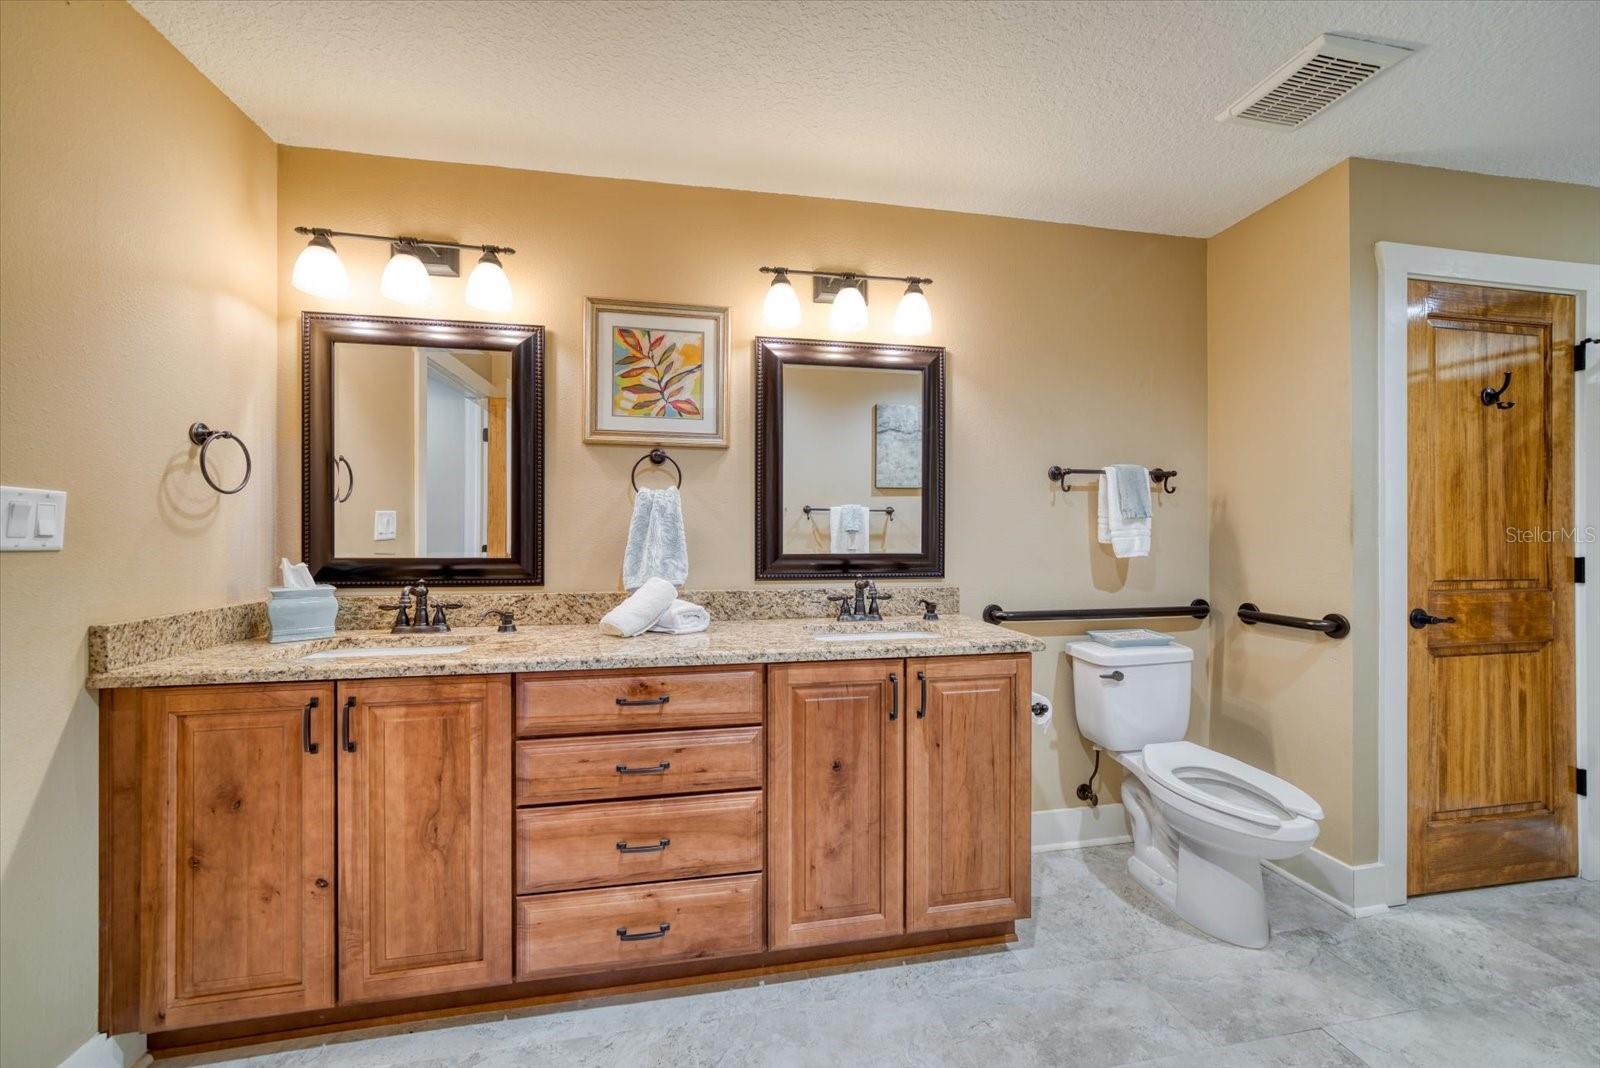 Full Bathroom with Double Sinks and Walk In Shower